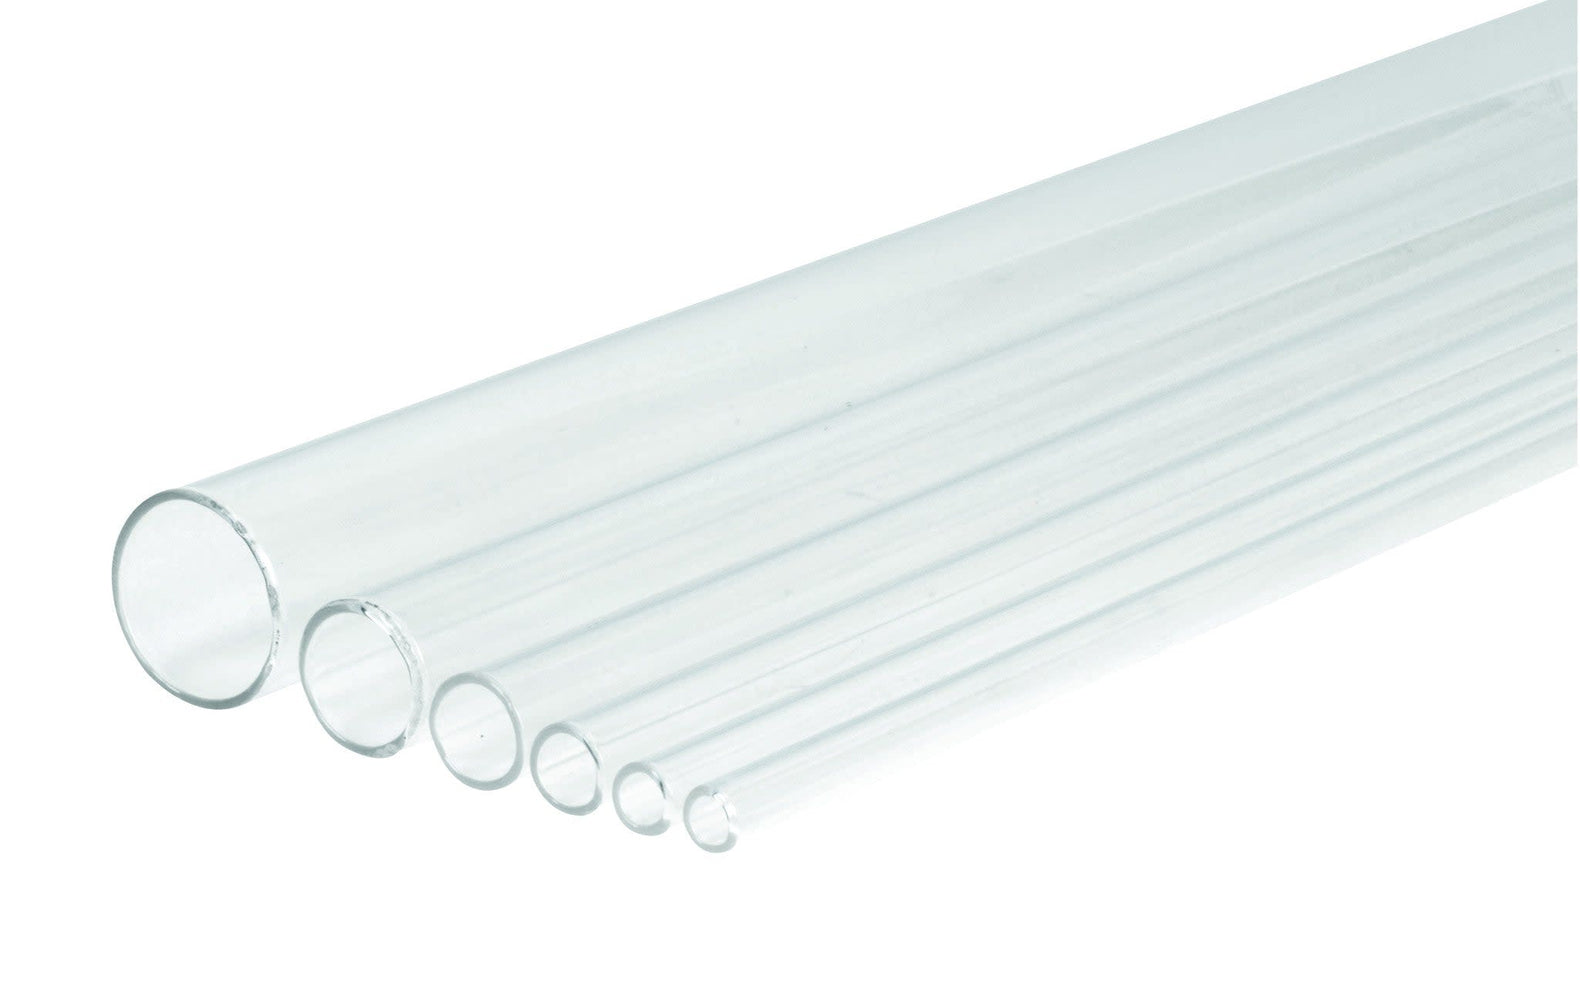 Tubing Neutral Glass, 8mm (Discontinued)